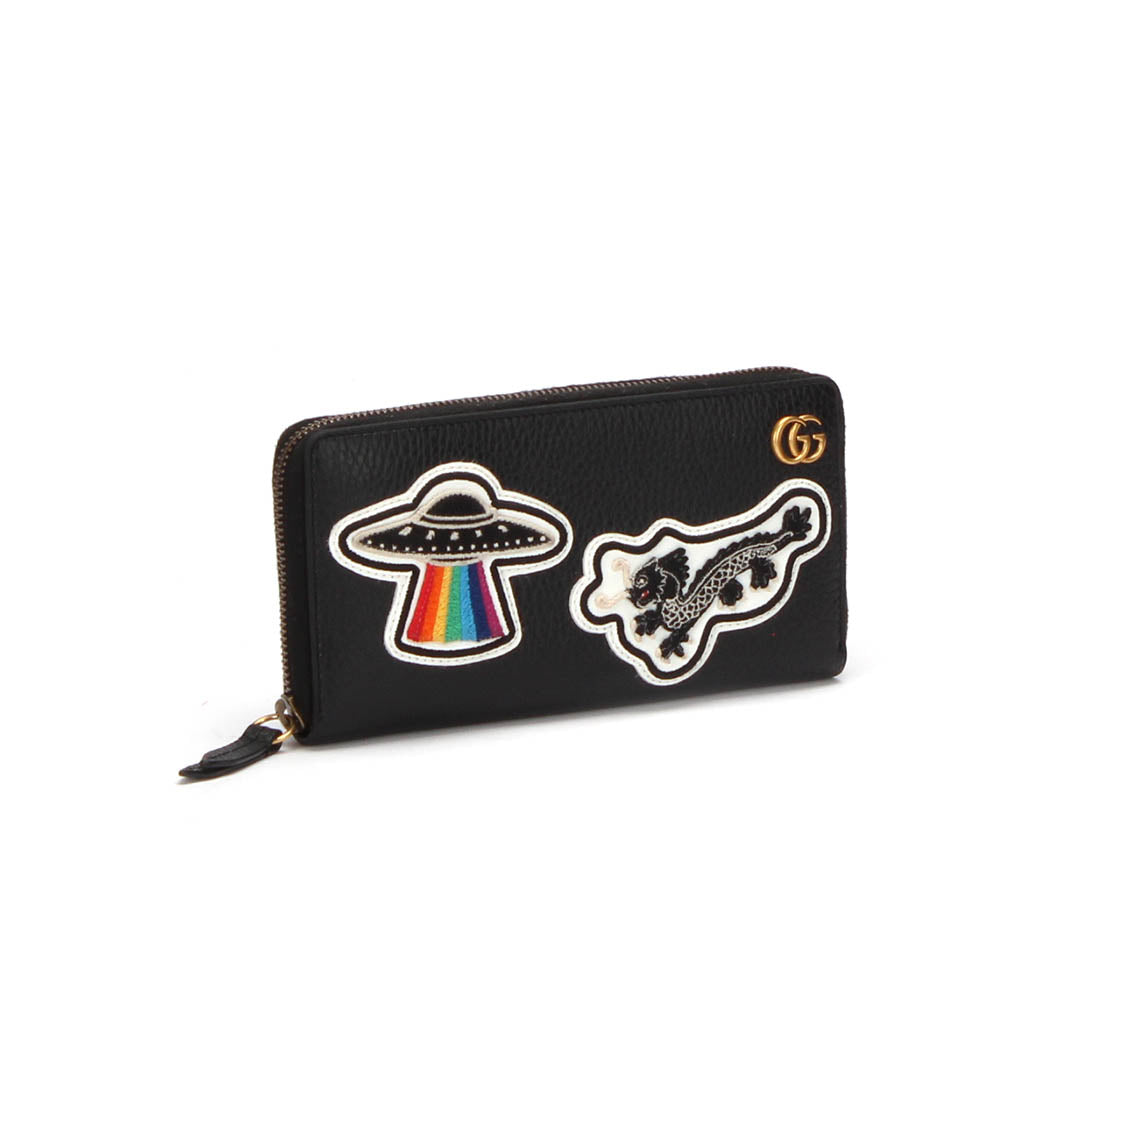 GG Marmont Night Courrier Wallet 474584